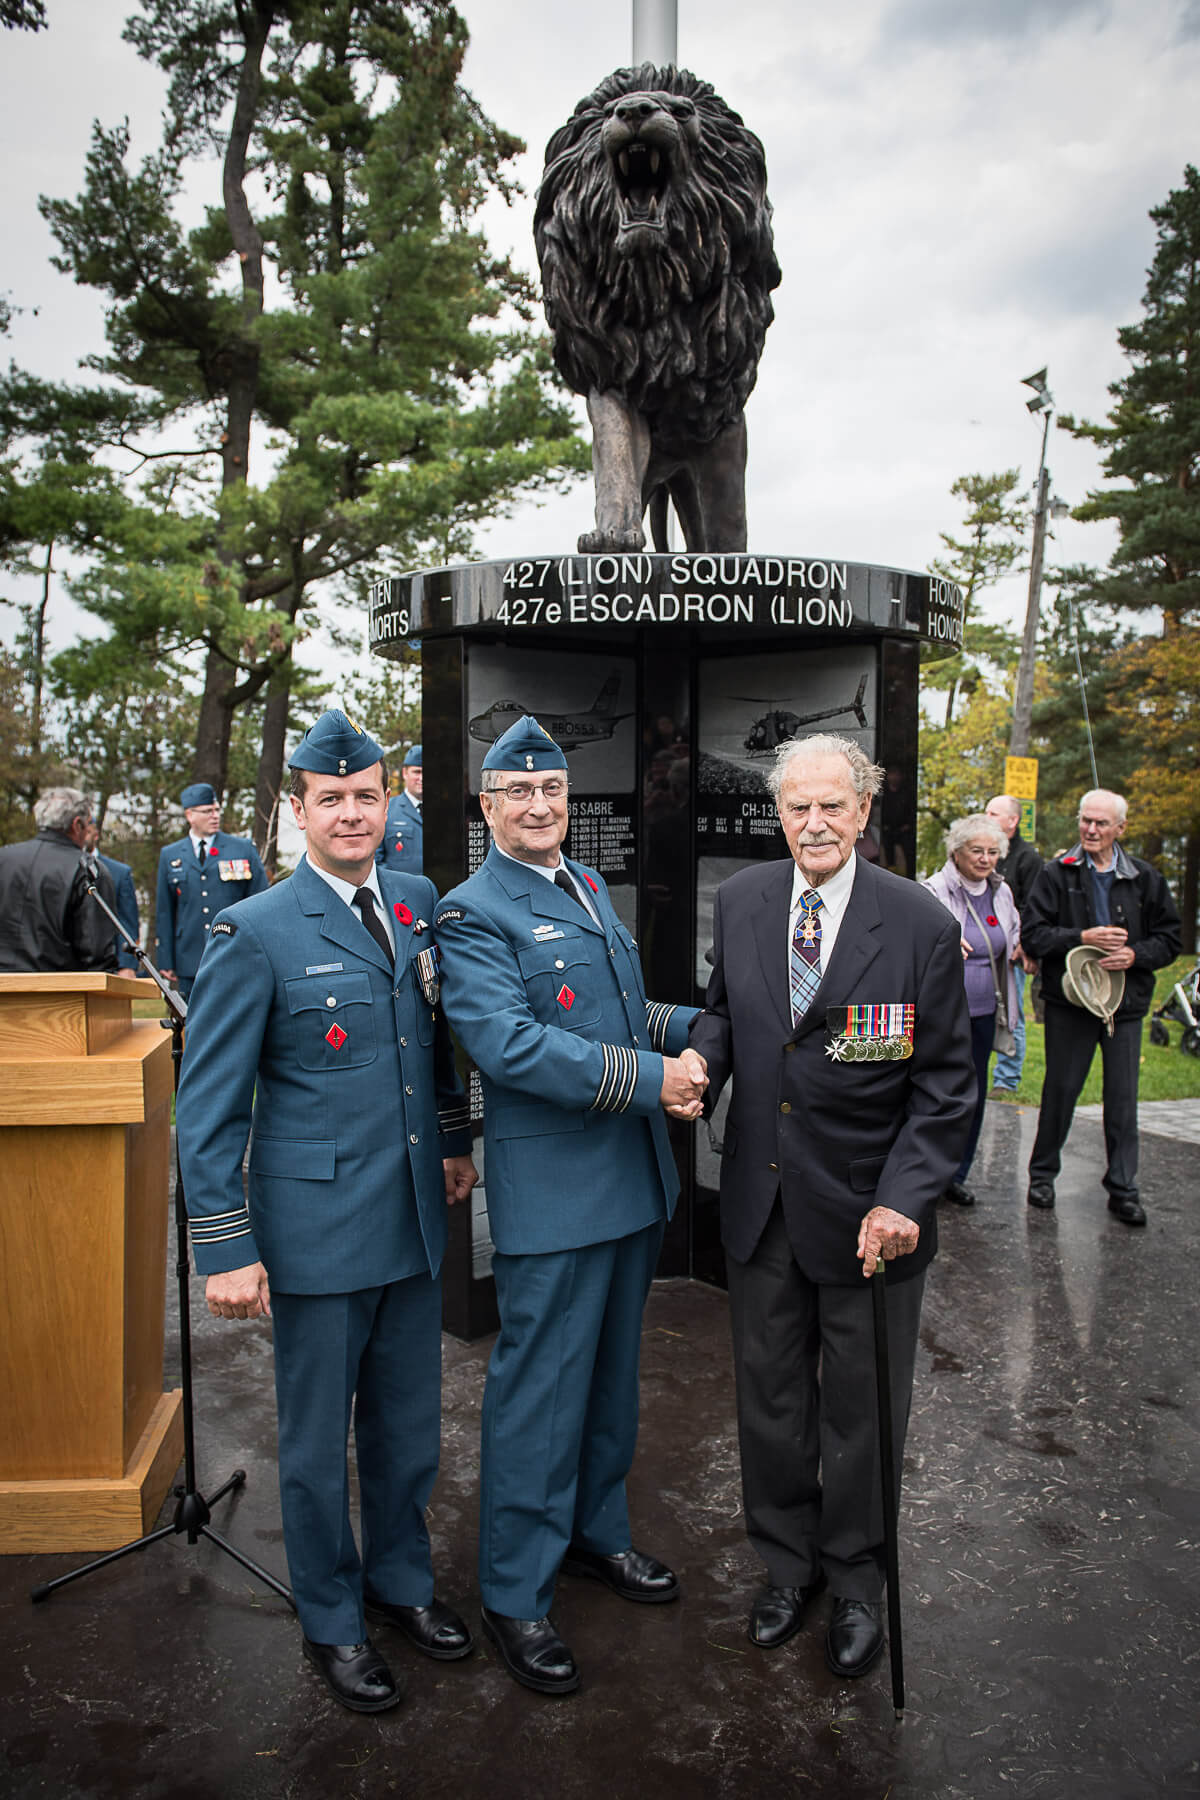 Largely championed by the Royal Canadian Air Force Association Trust and 427 SOAS Honorary Col Delbert Lippert, the cenotaph is a milestone in the Squadron’s history, being the first dedication of its kind to honor the sacrifices and storied past of 427 Squadron